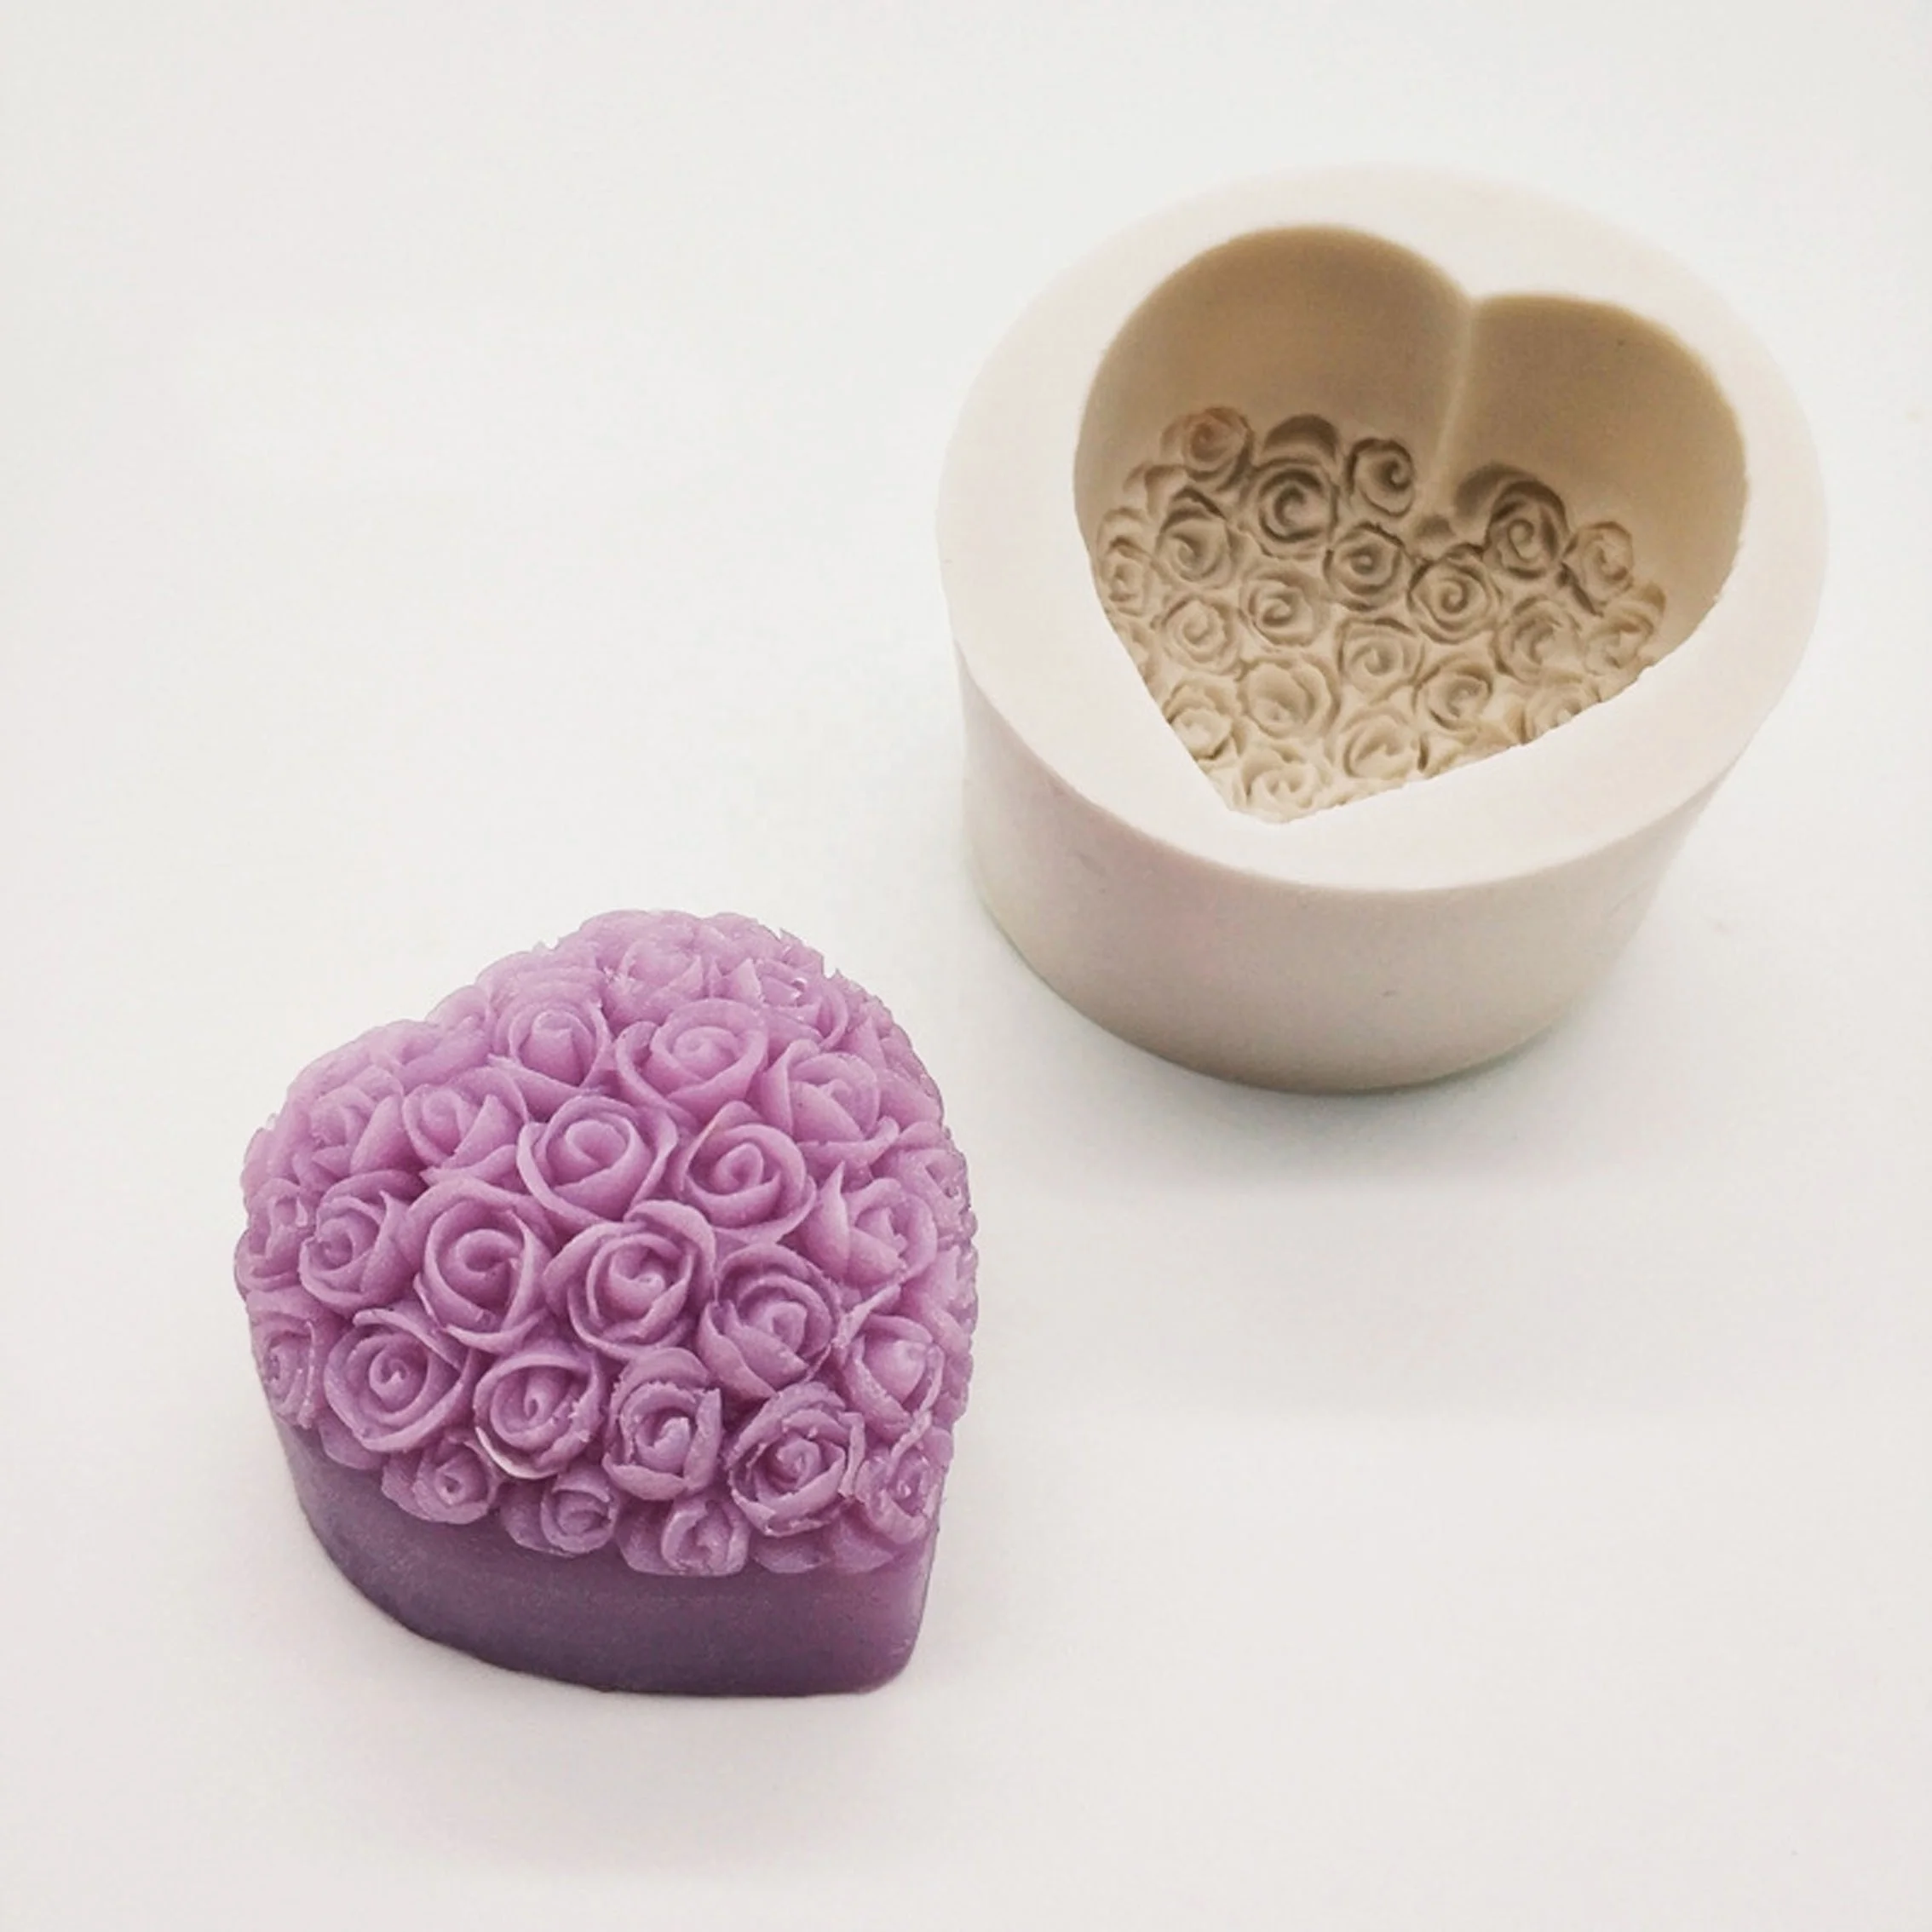 1 cavity heart shaped rose flower 3D non stick silicone cake mold chocolate mold cake tools